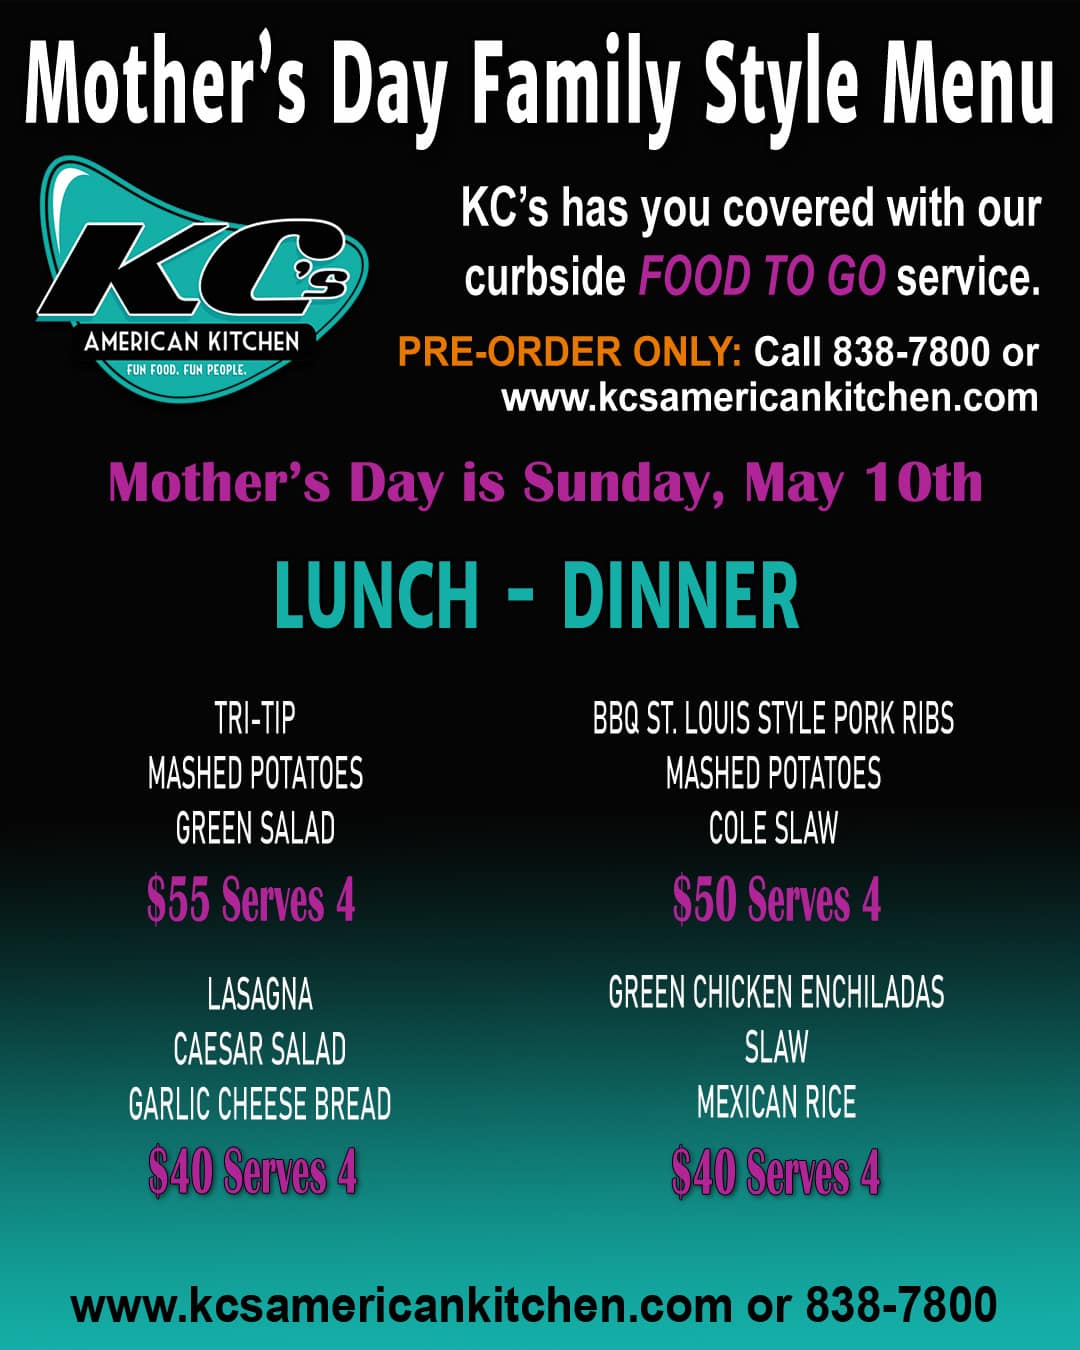 Mother's Day lunch and dinner to go at KC's American Kitchen in Windsor, CA.